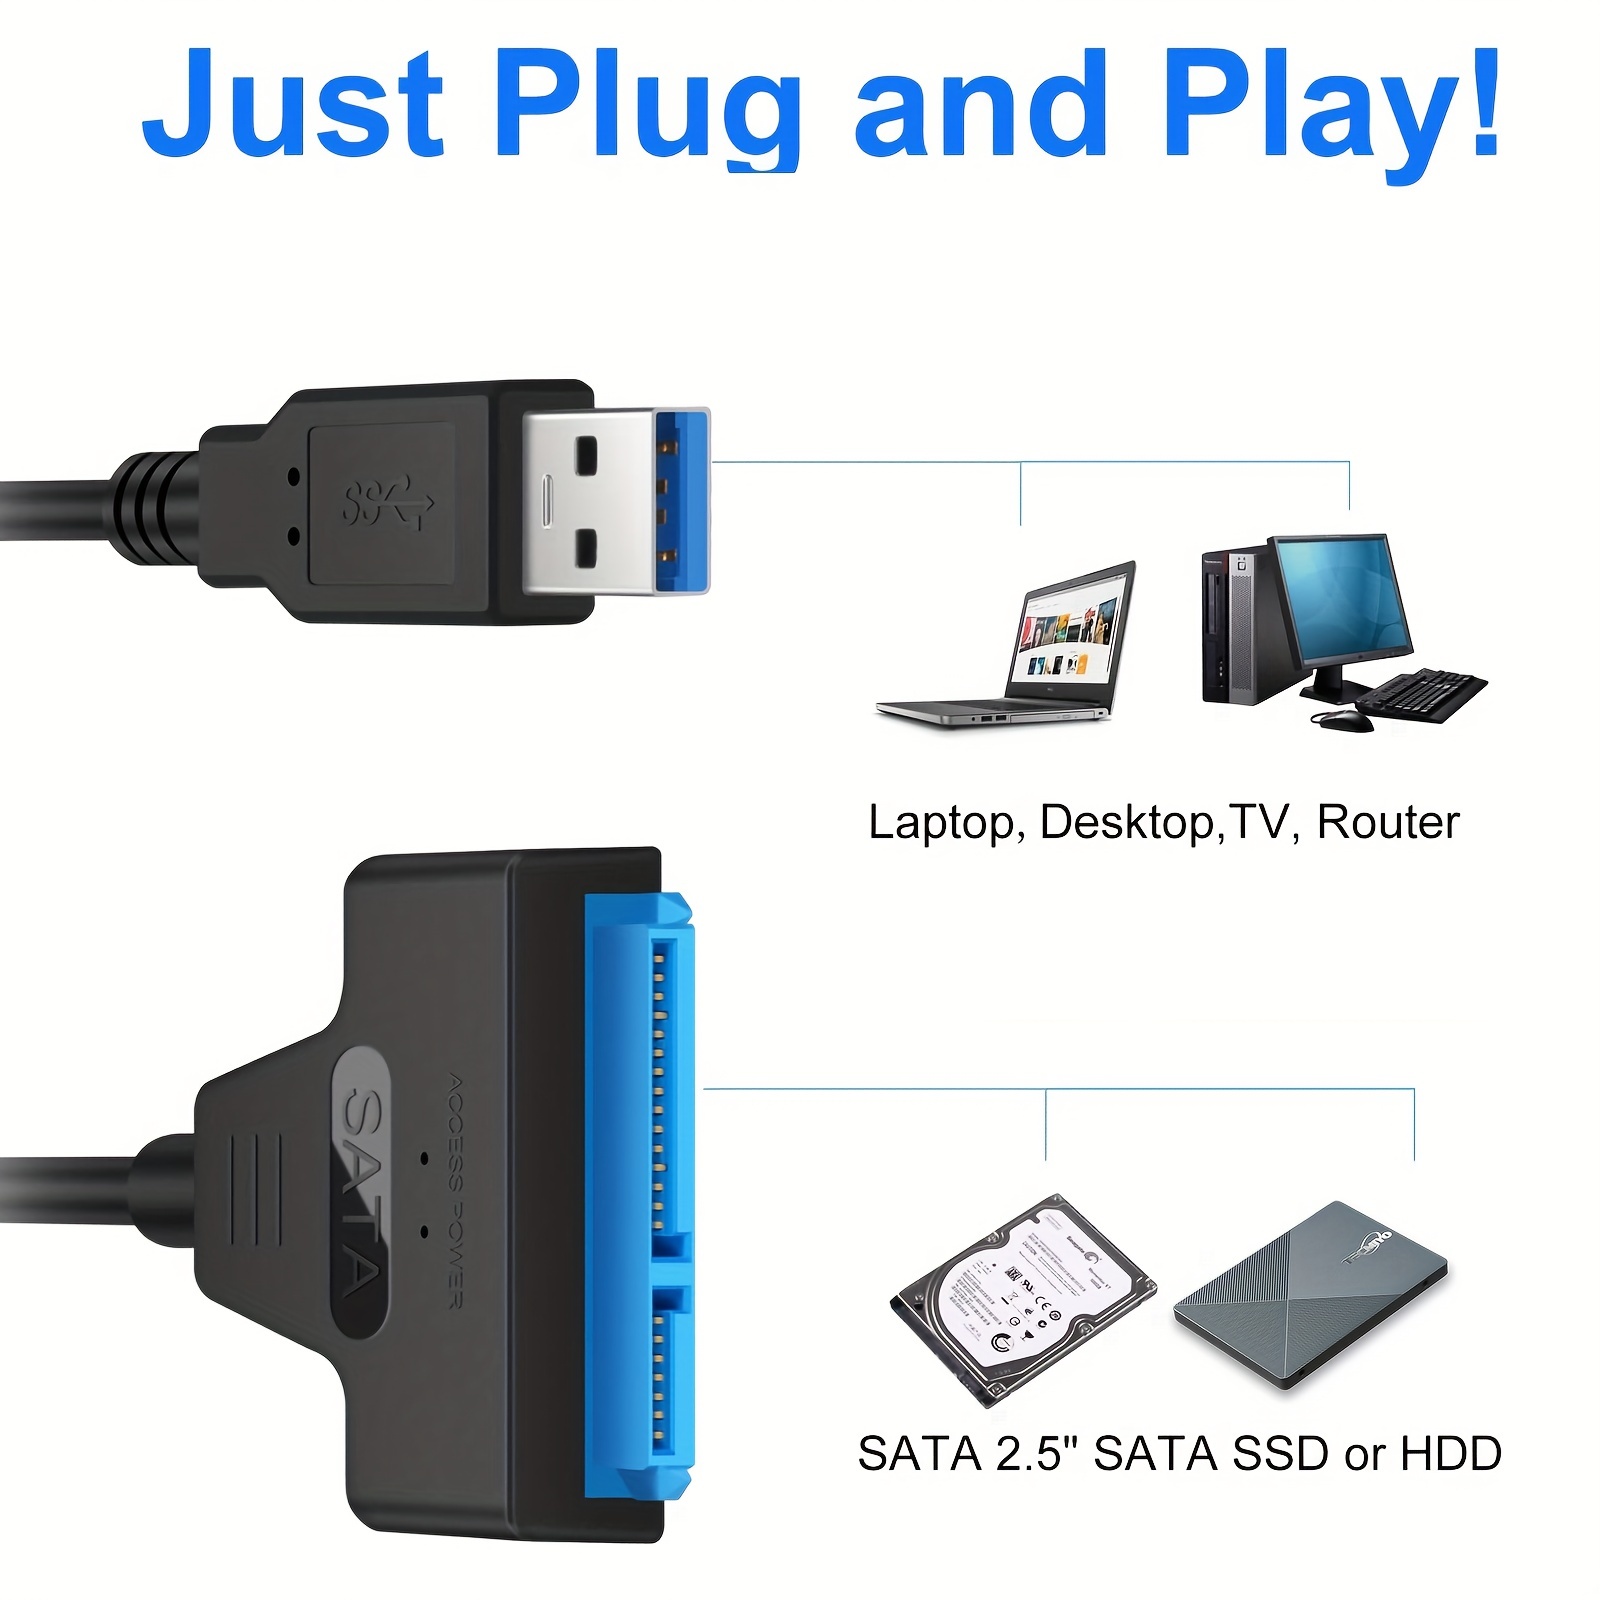  VCOM SATA to USB Adapter Cable for 2.5 inch SSD and HDD, USB  3.0 to SATA III Hard Driver Adapter,Support UASP SATA to USB Cable SATA  Adapter Cable USB to SATA